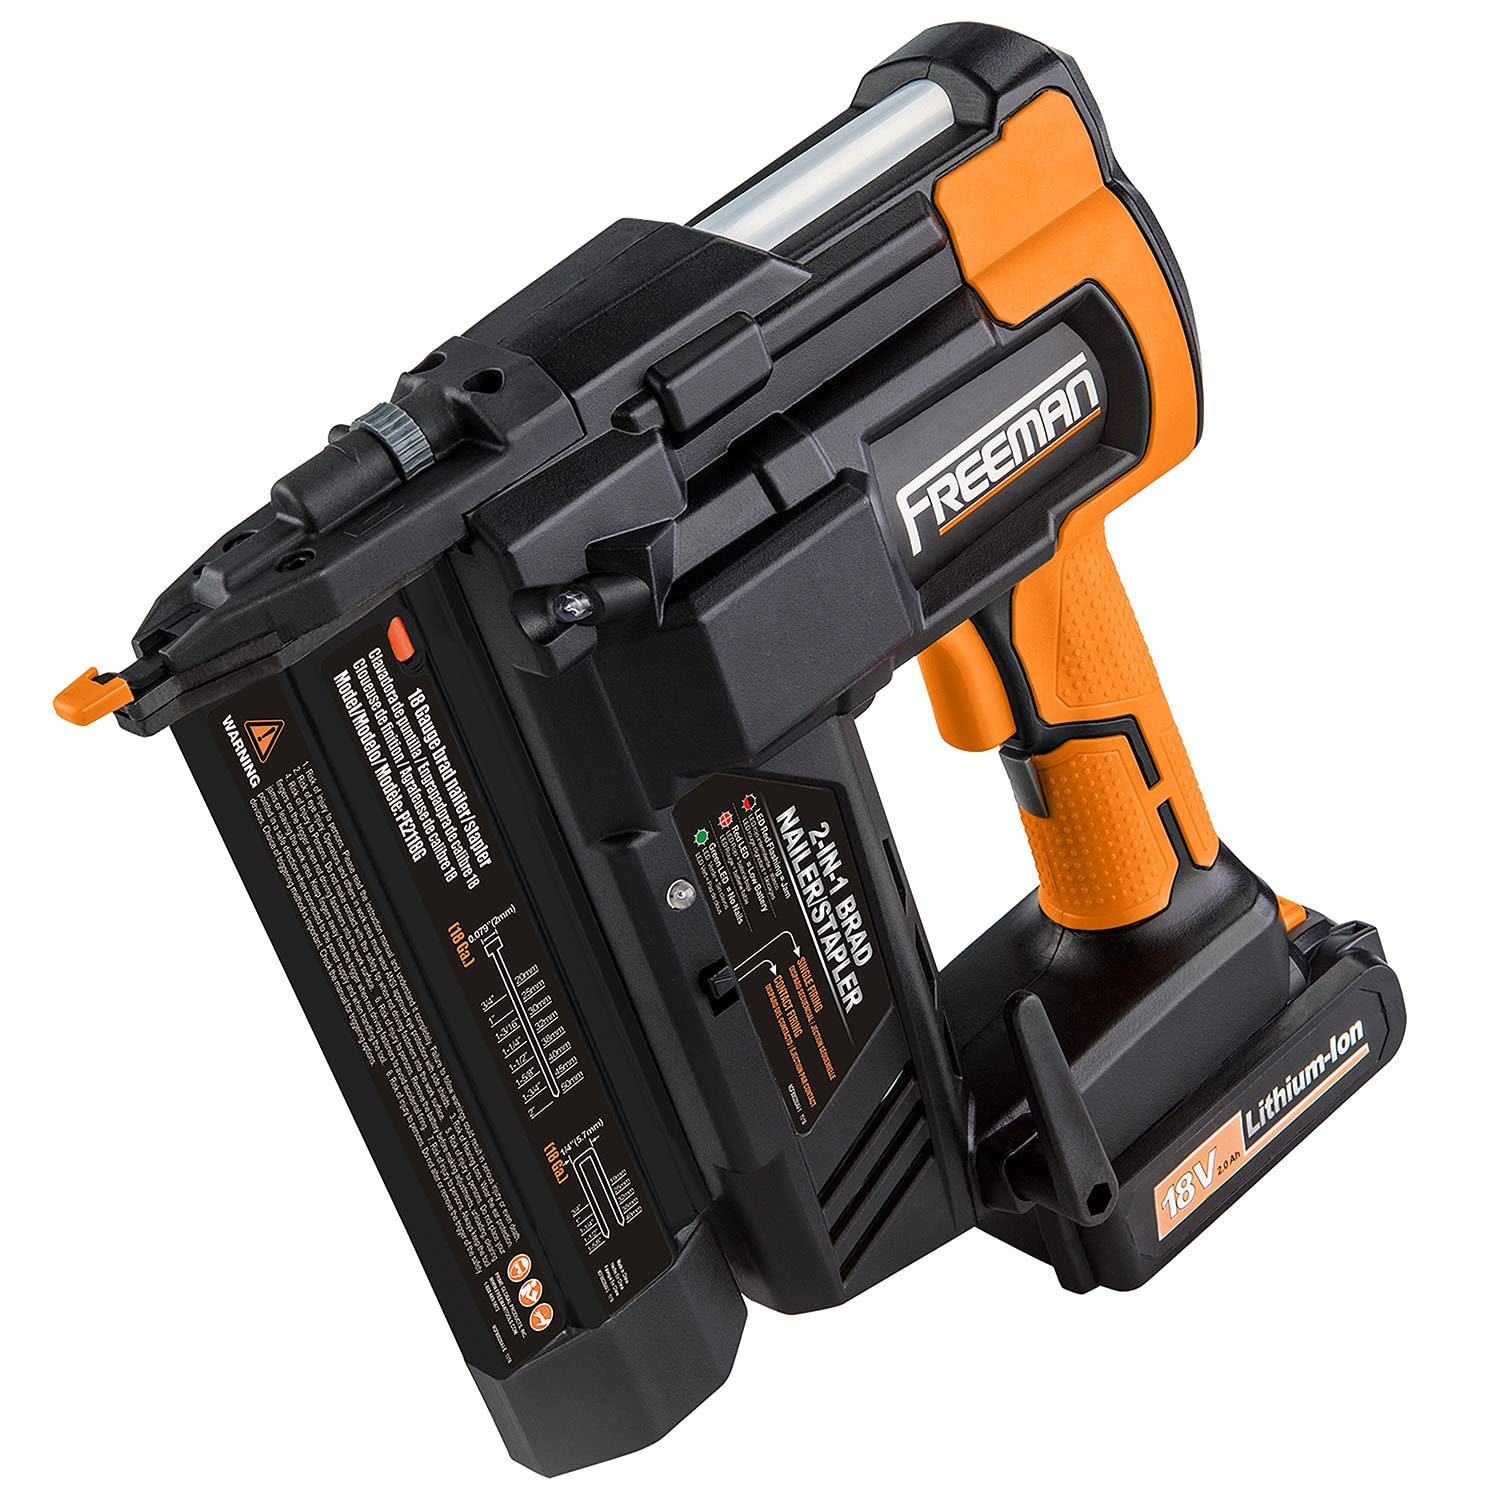 Freeman PE2118G 18 Volt Cordless 2-in-1 18-Gauge 2" Nailer / Stapler Kit with Lithium-Ion Batteries, Charger, Case, and Fasteners (1000 Count)